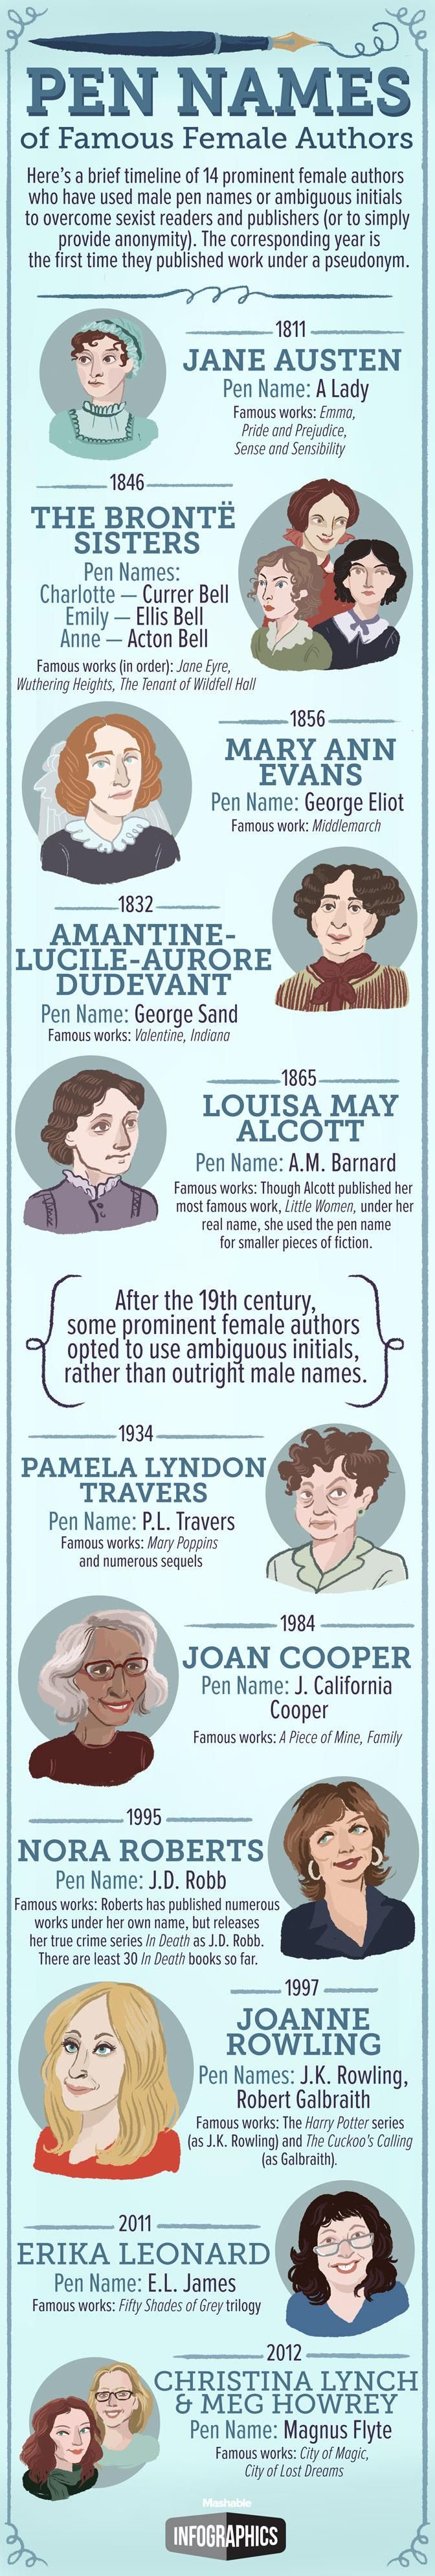 A brief history of female authors with male pen names